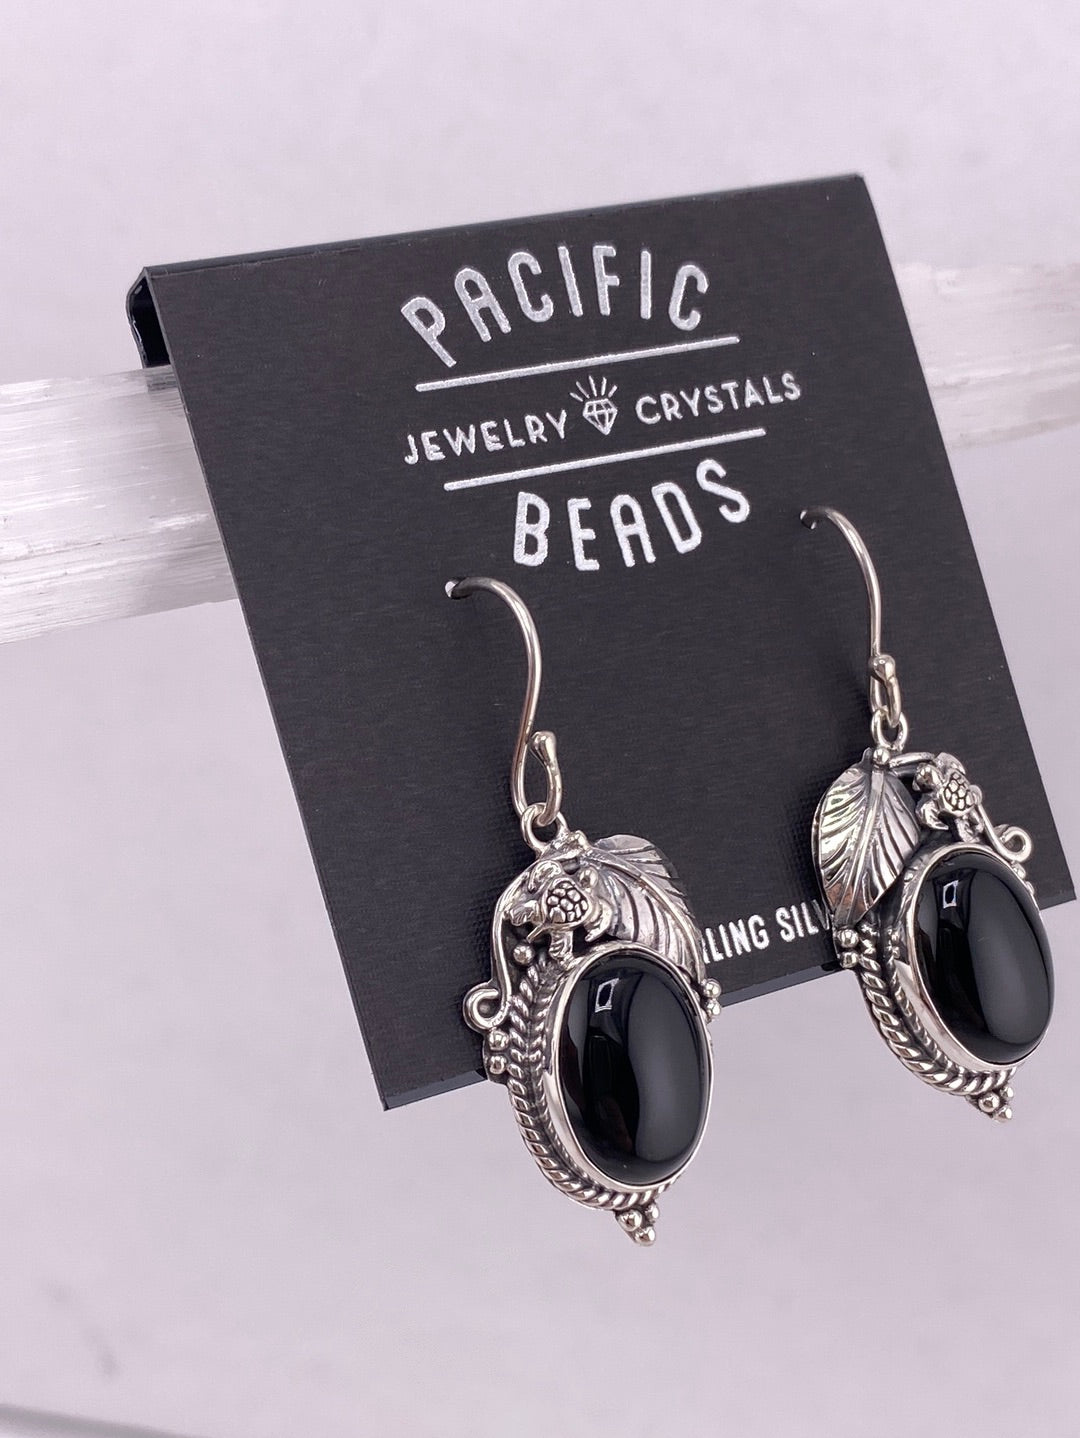 Sterling silver black onyx earrings designed by Shlomo available at wholesale and retail prices, only at our crystal shop in San Diego!